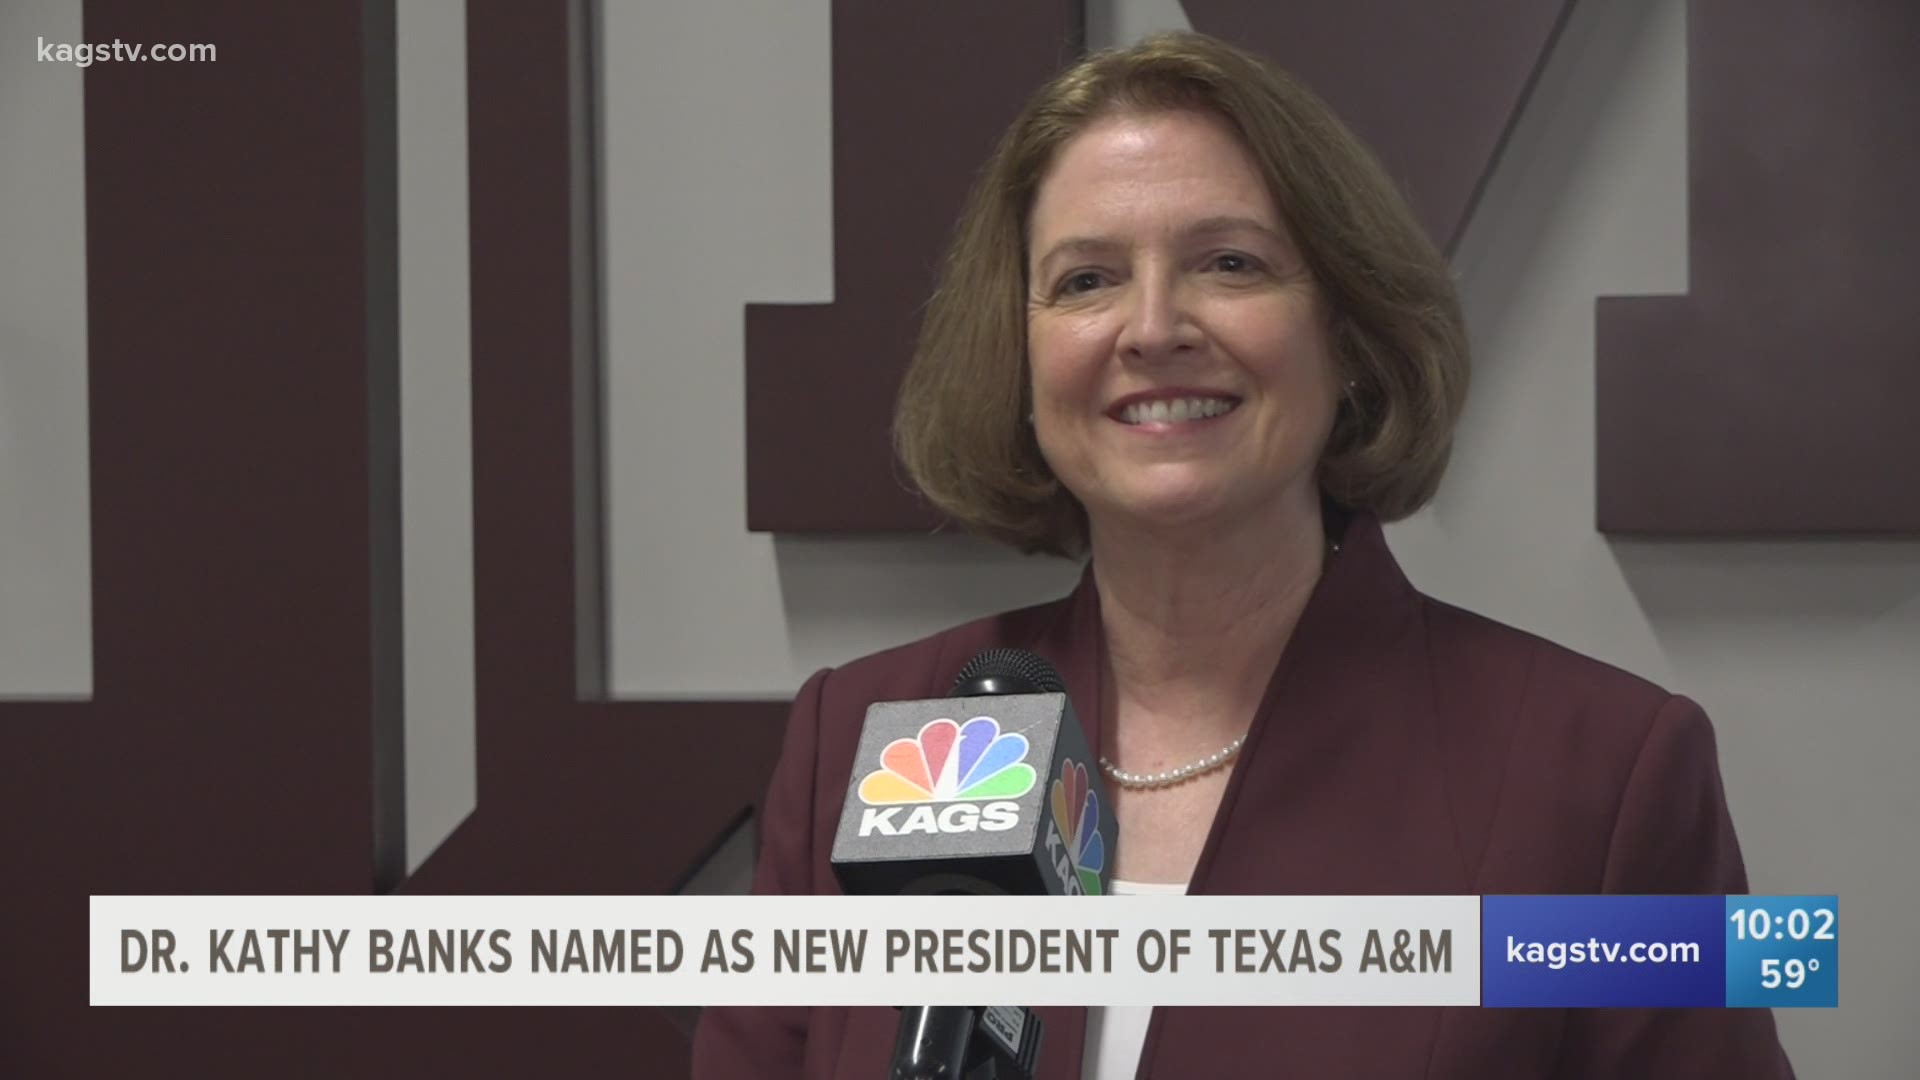 Dr. Banks will assume her new duties on June 1.